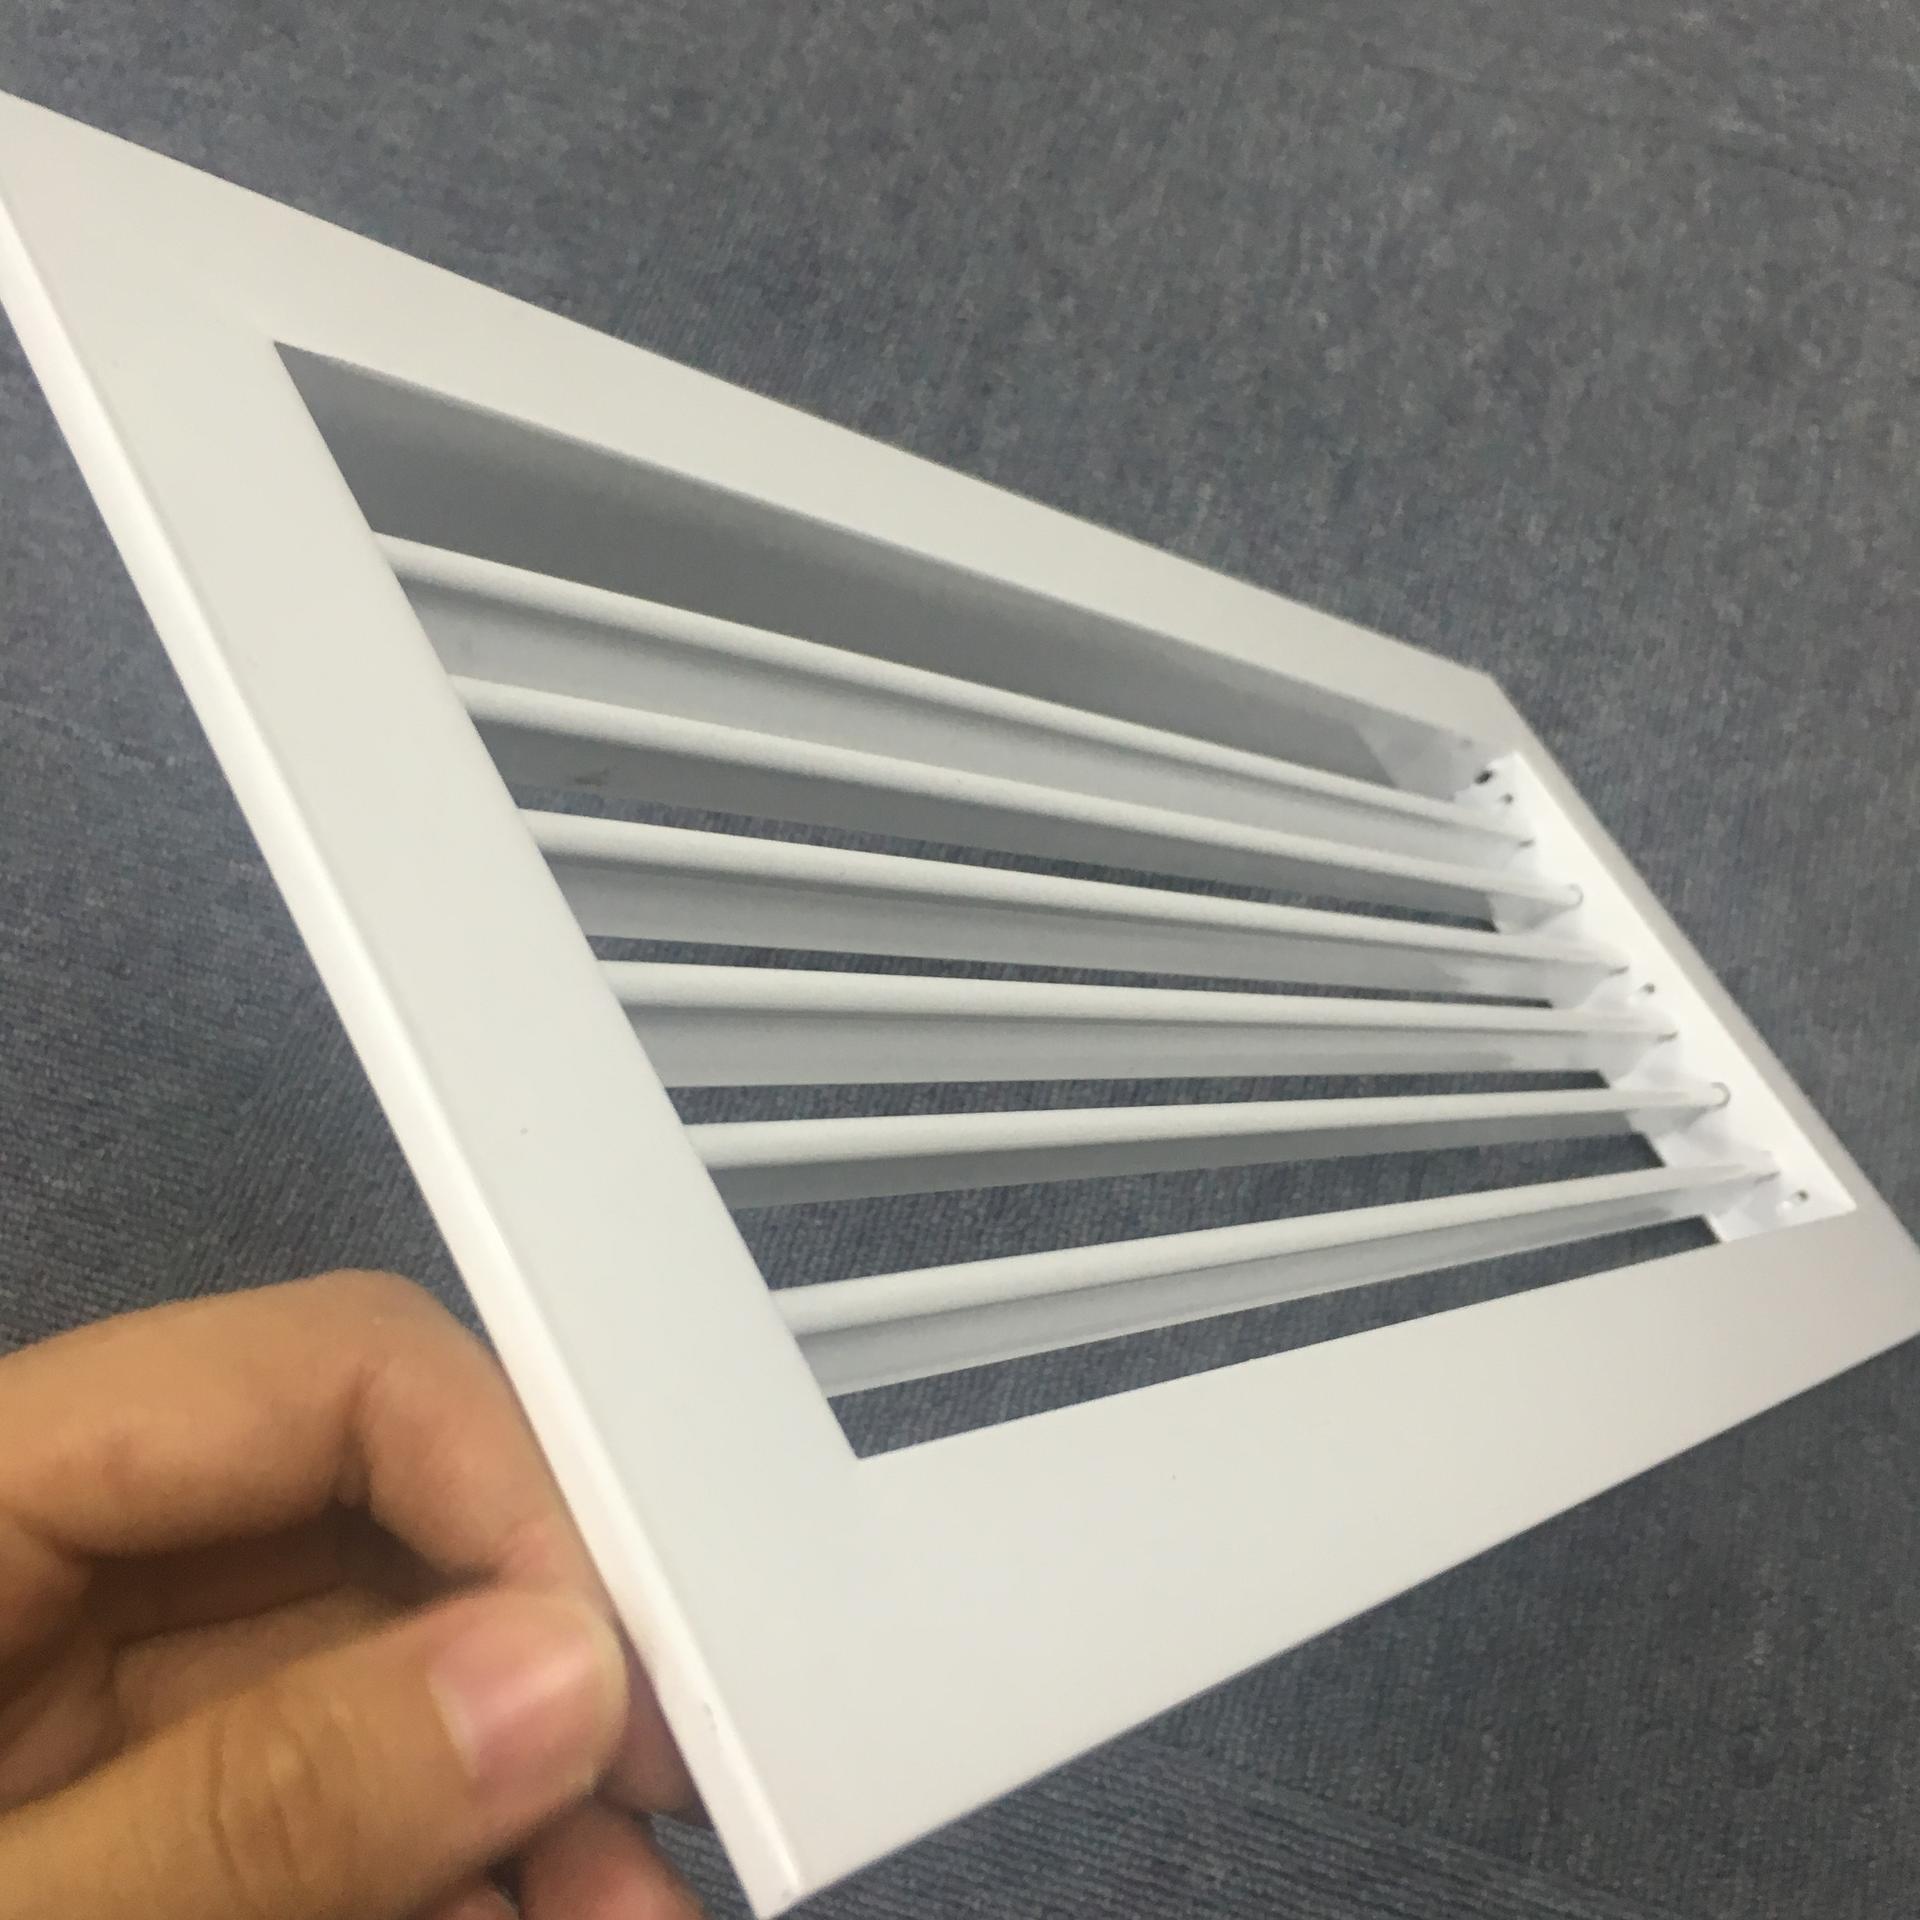 Hvac System Aluminum Air Register Single Deflection Supply Air Grille